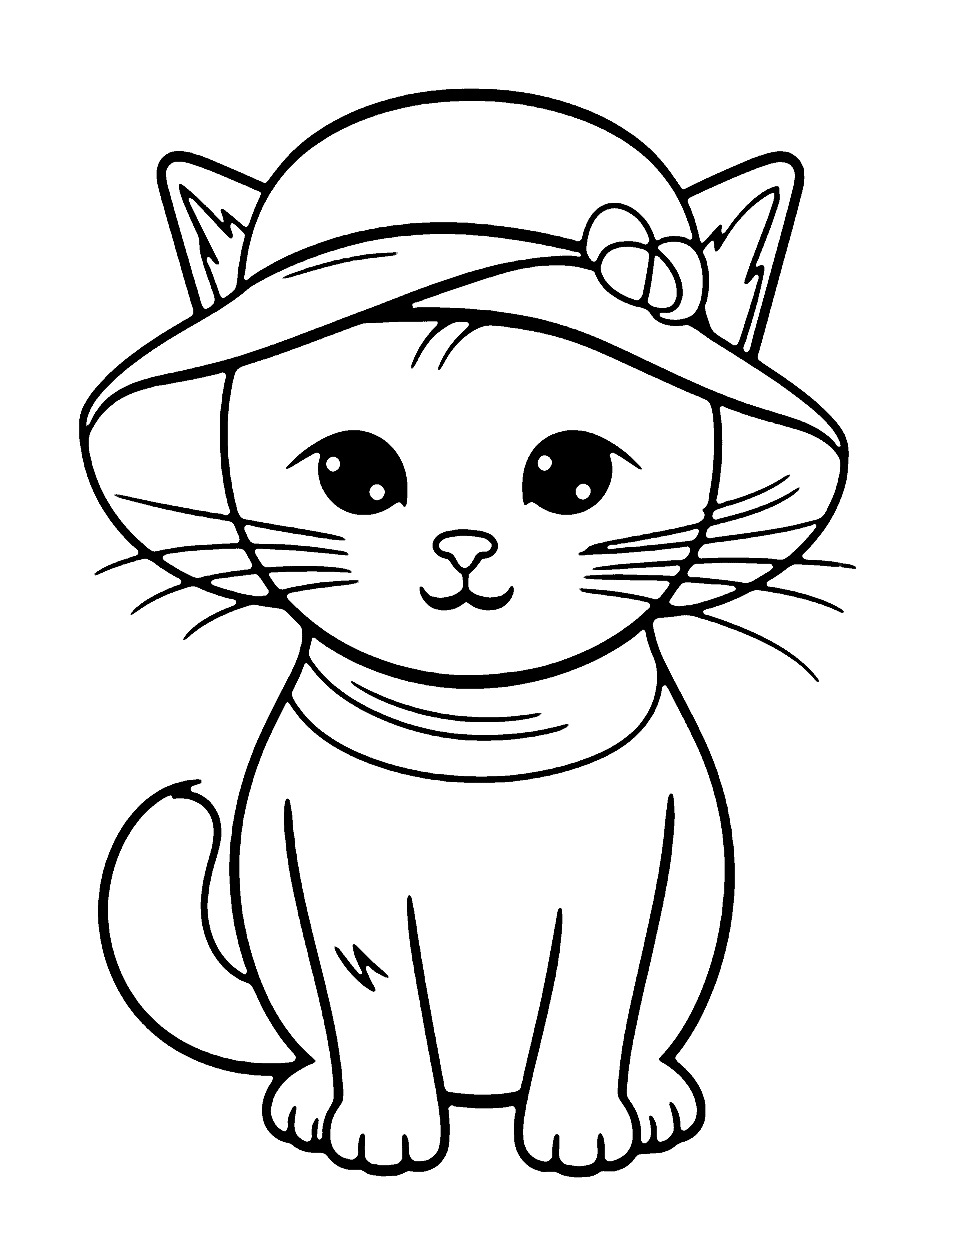 Preschool Cat in a Hat Coloring Page - A cute and simple image of a cat wearing a large, floppy hat.